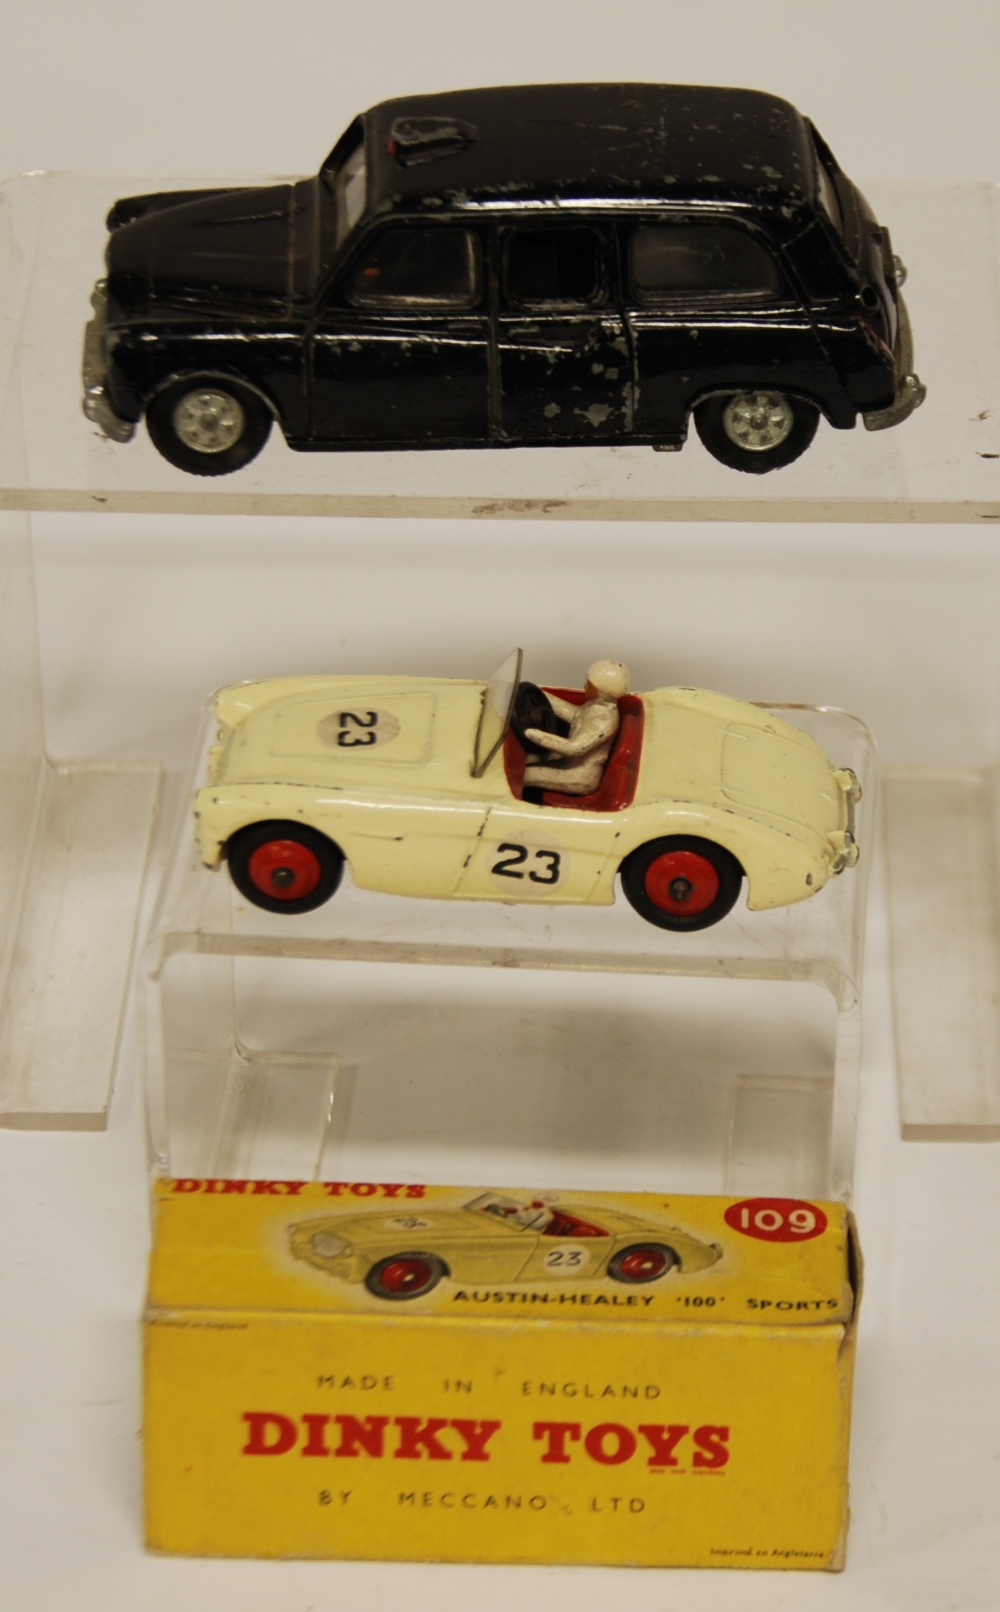 DINKY 109 AUSTIN HEALEY `100` - Cream No. 23 (Good - few chips- box poor) (missing end flap) and